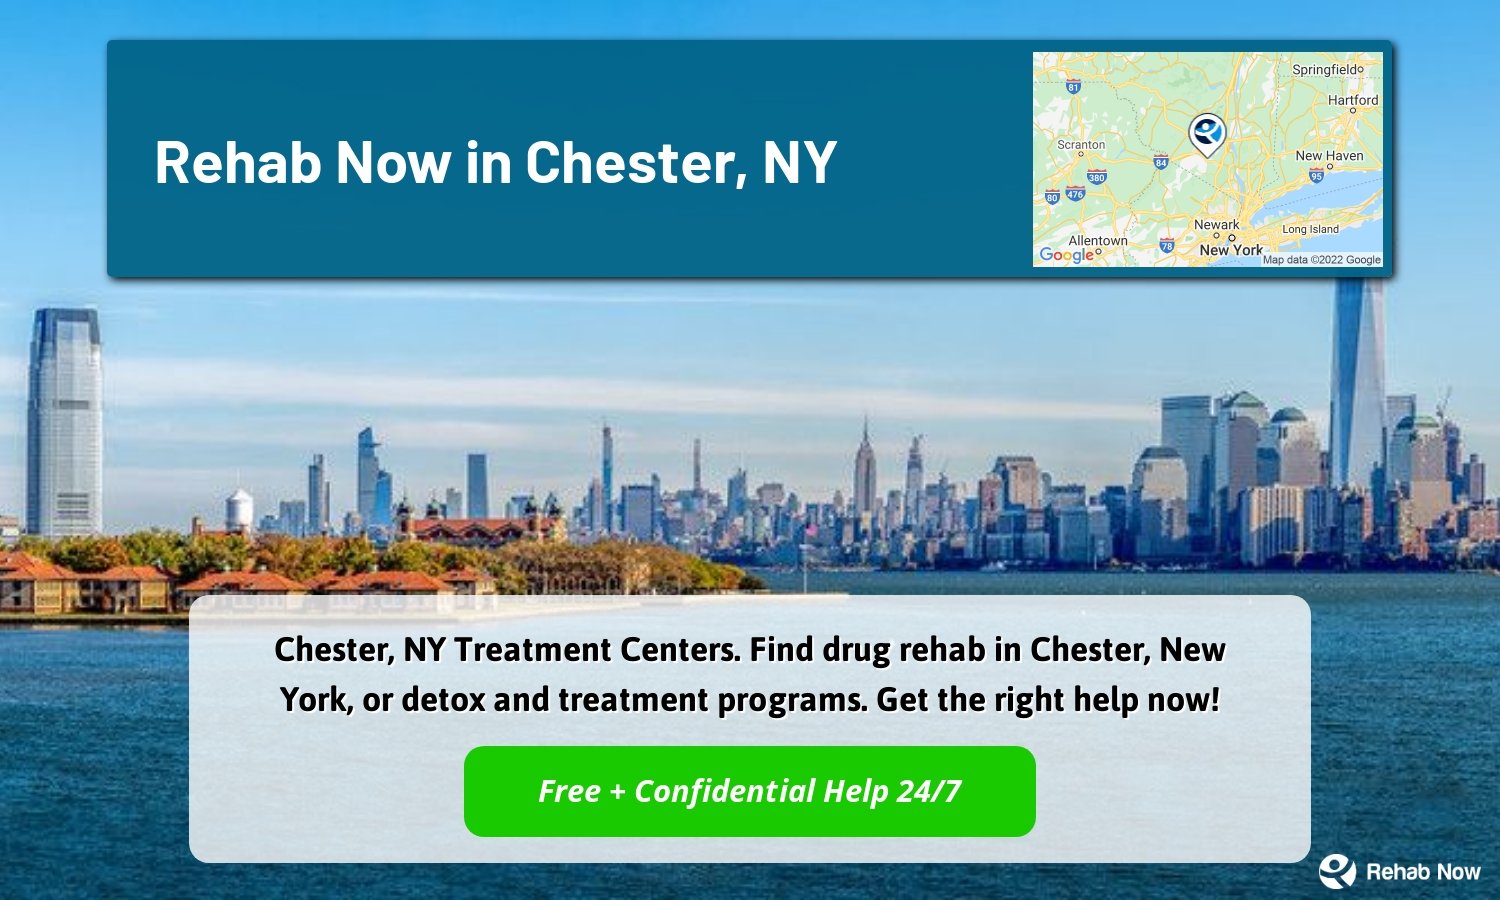 Chester, NY Treatment Centers. Find drug rehab in Chester, New York, or detox and treatment programs. Get the right help now!